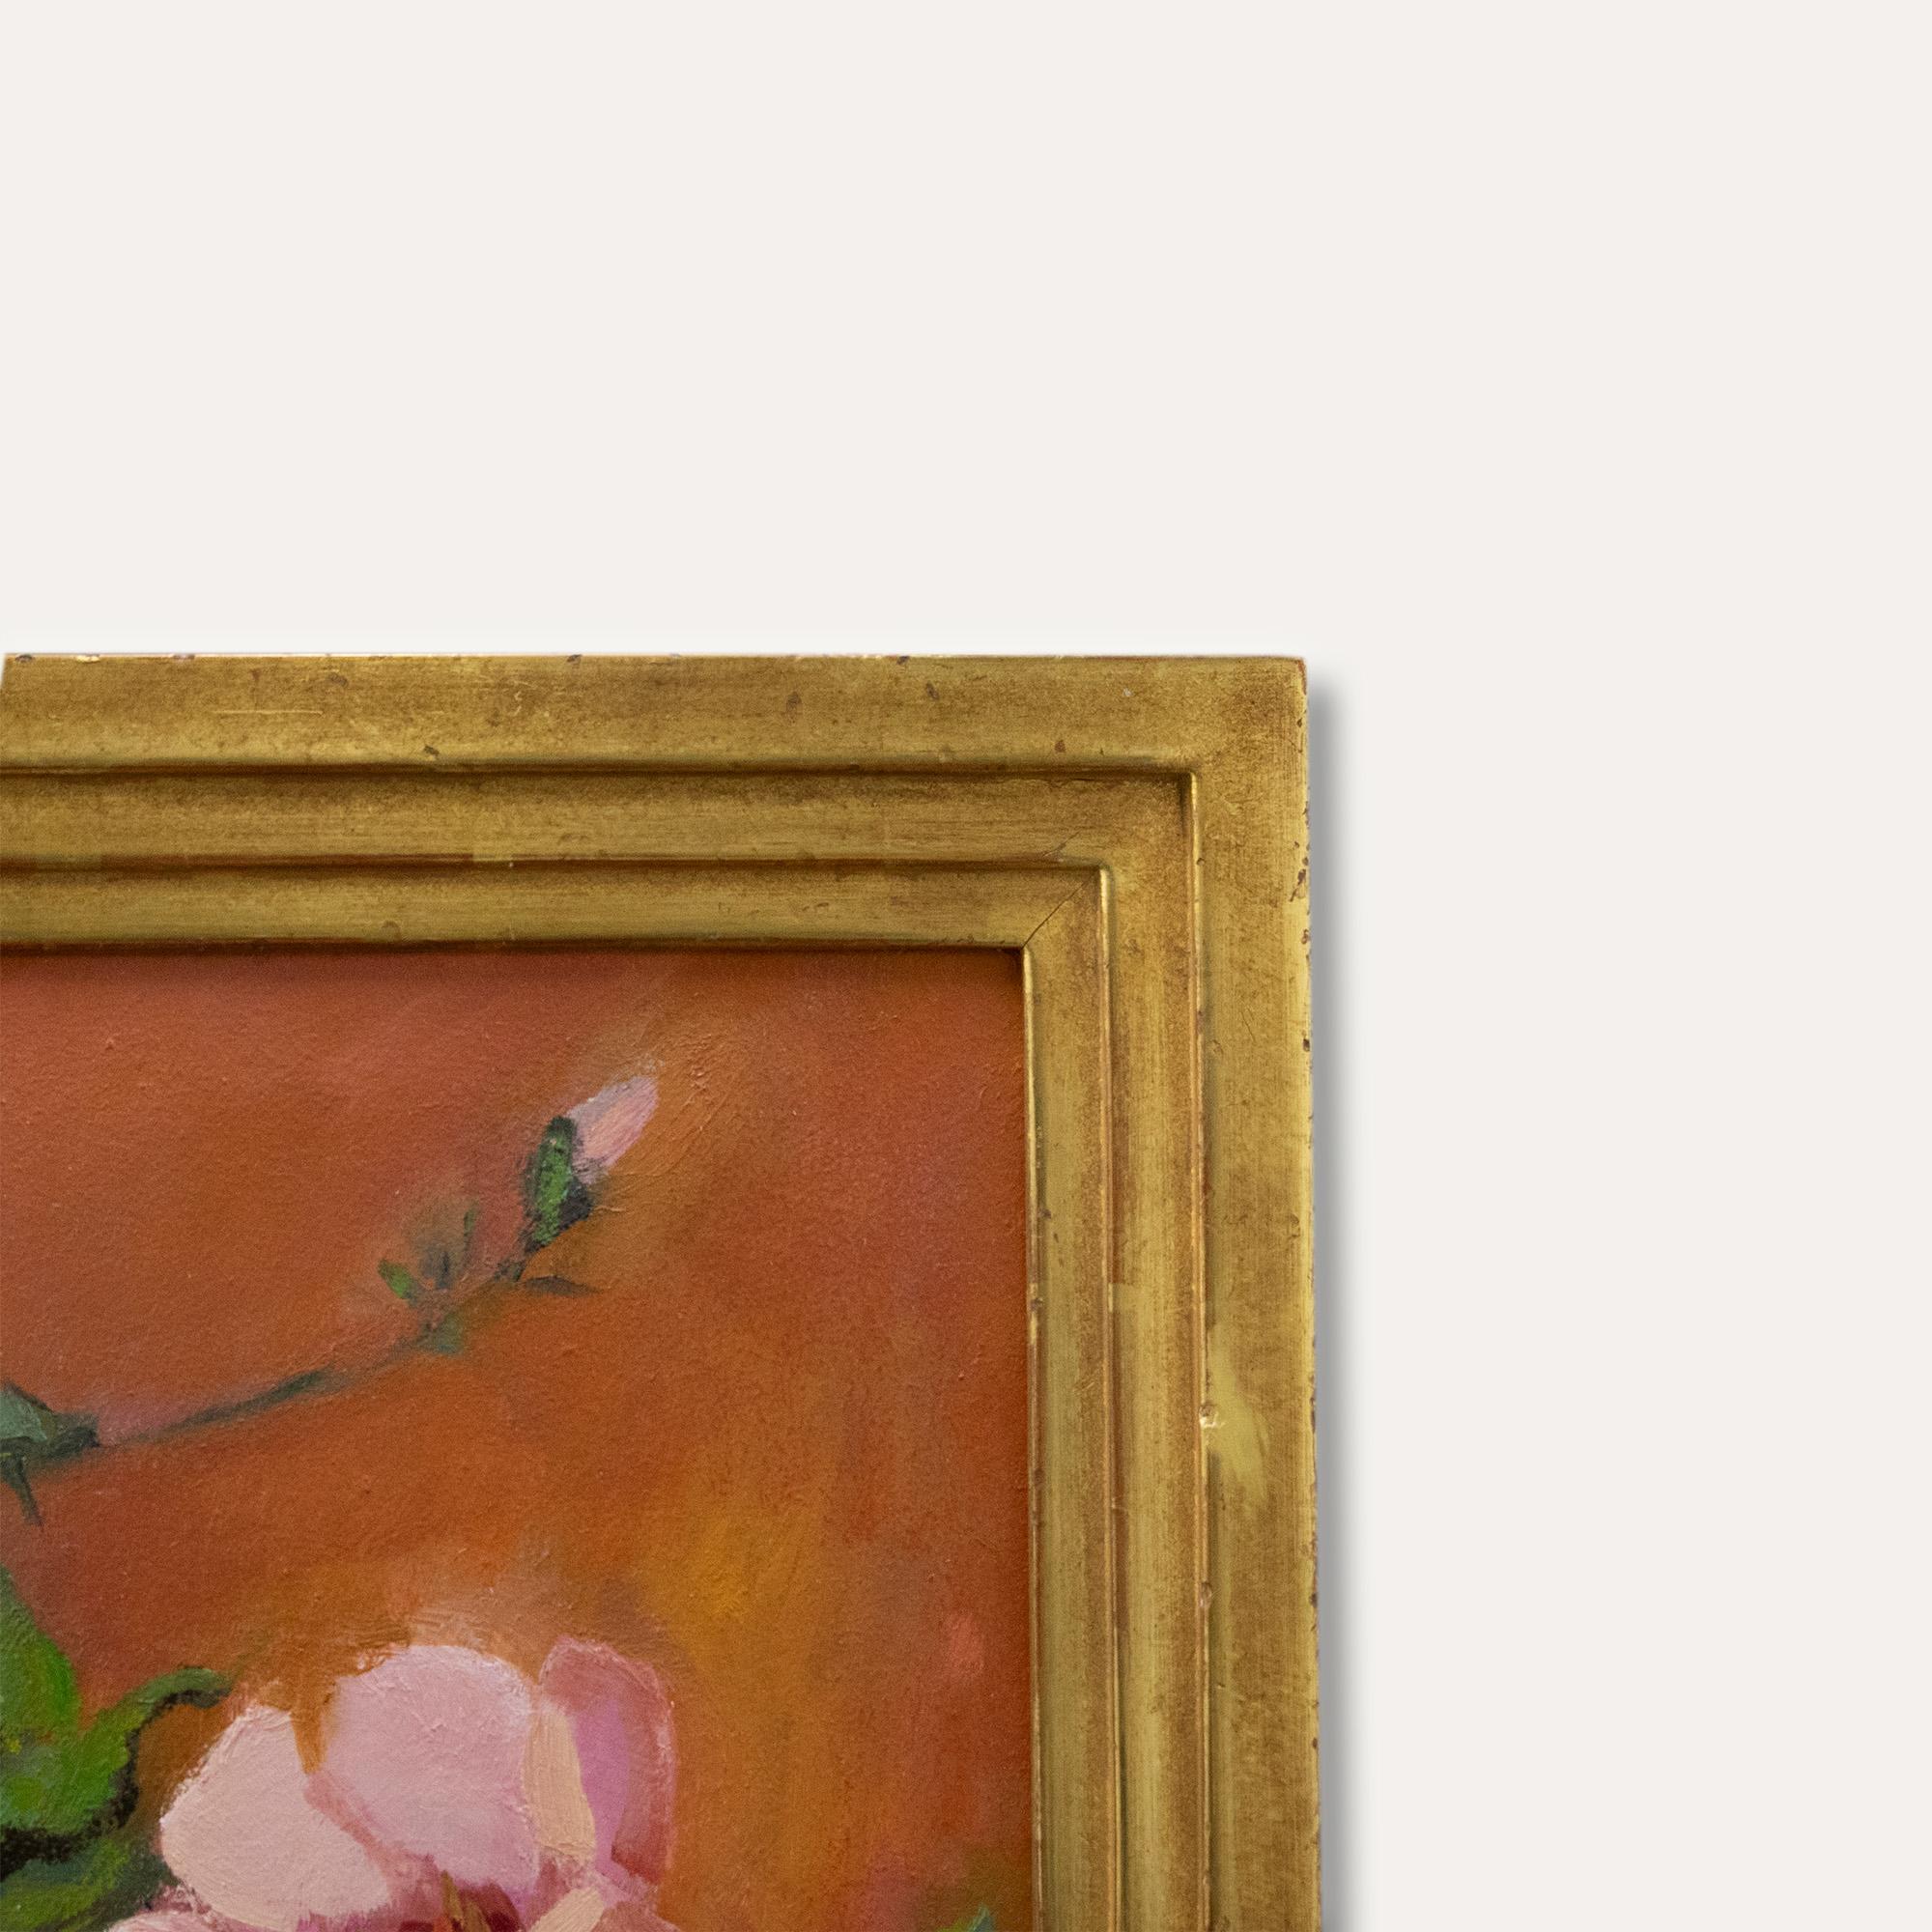 A vibrant still life of pink flowers in a vase, with apples from the garden. Well-presented in a decorative gilt-effect frame. Signed. On board.